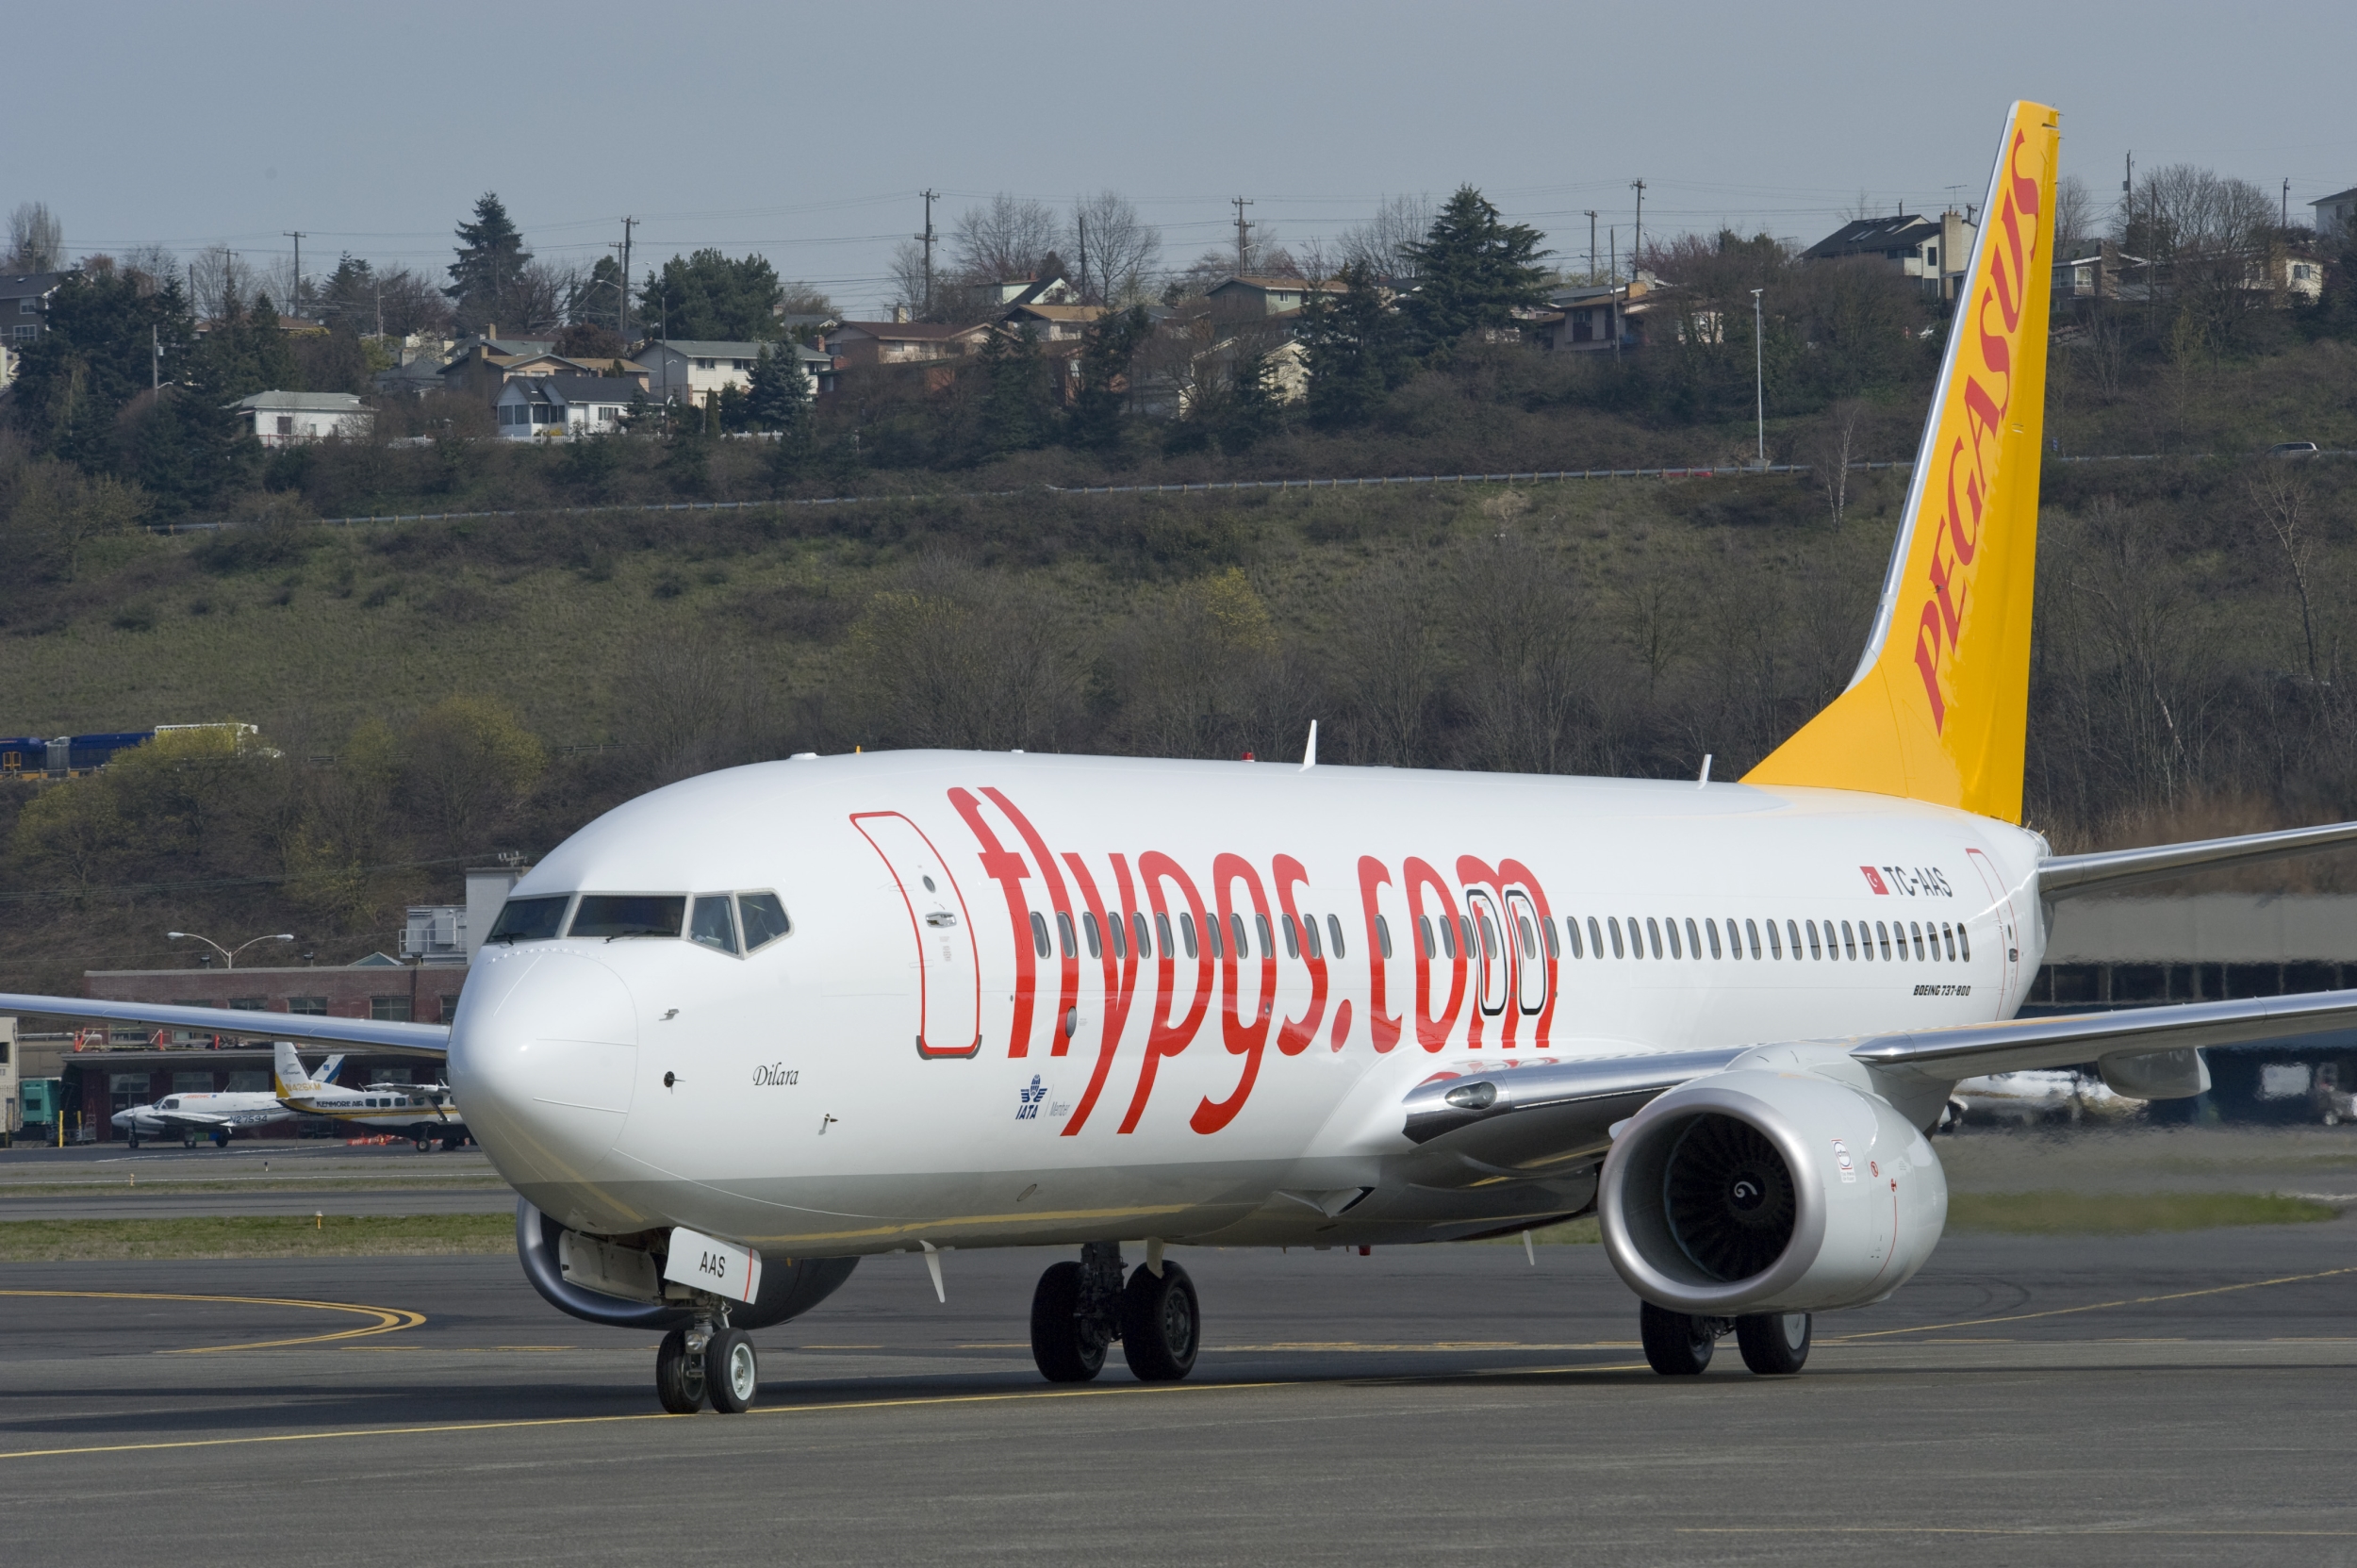 A Pegasus Airlines Boeing 737-800 like the one involved in the incident (Image: Pegasus Airlines)